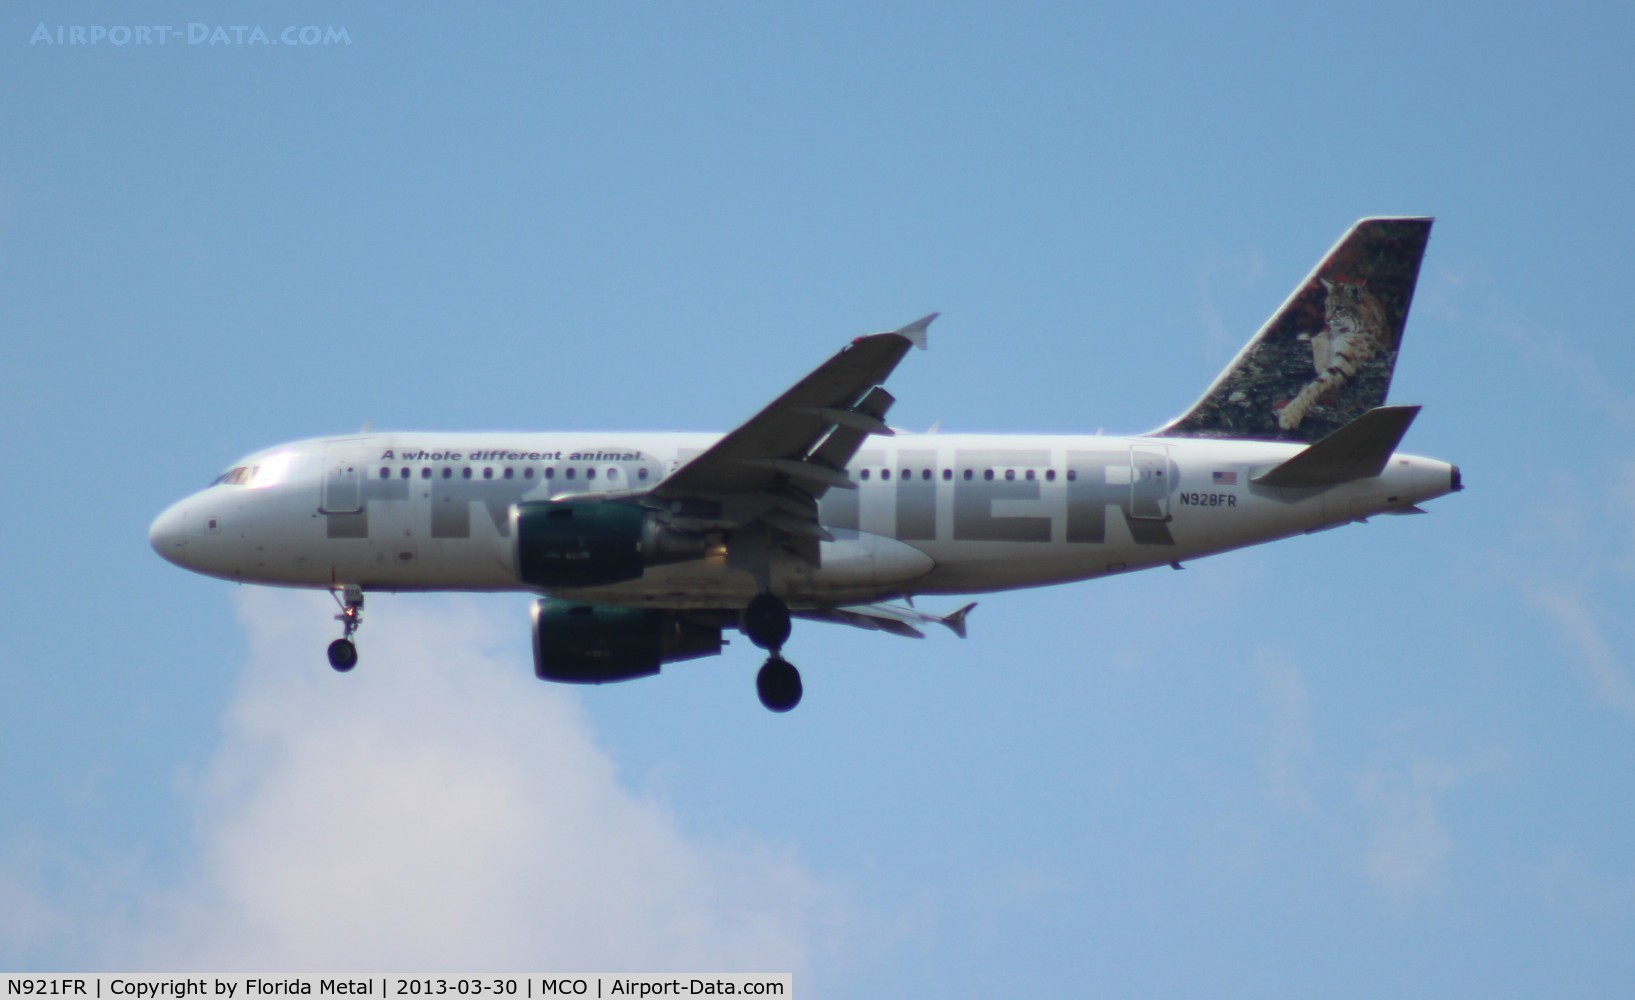 N921FR, 2003 Airbus A319-111 C/N 2010, Frontier Fritz Mountain Goat A319